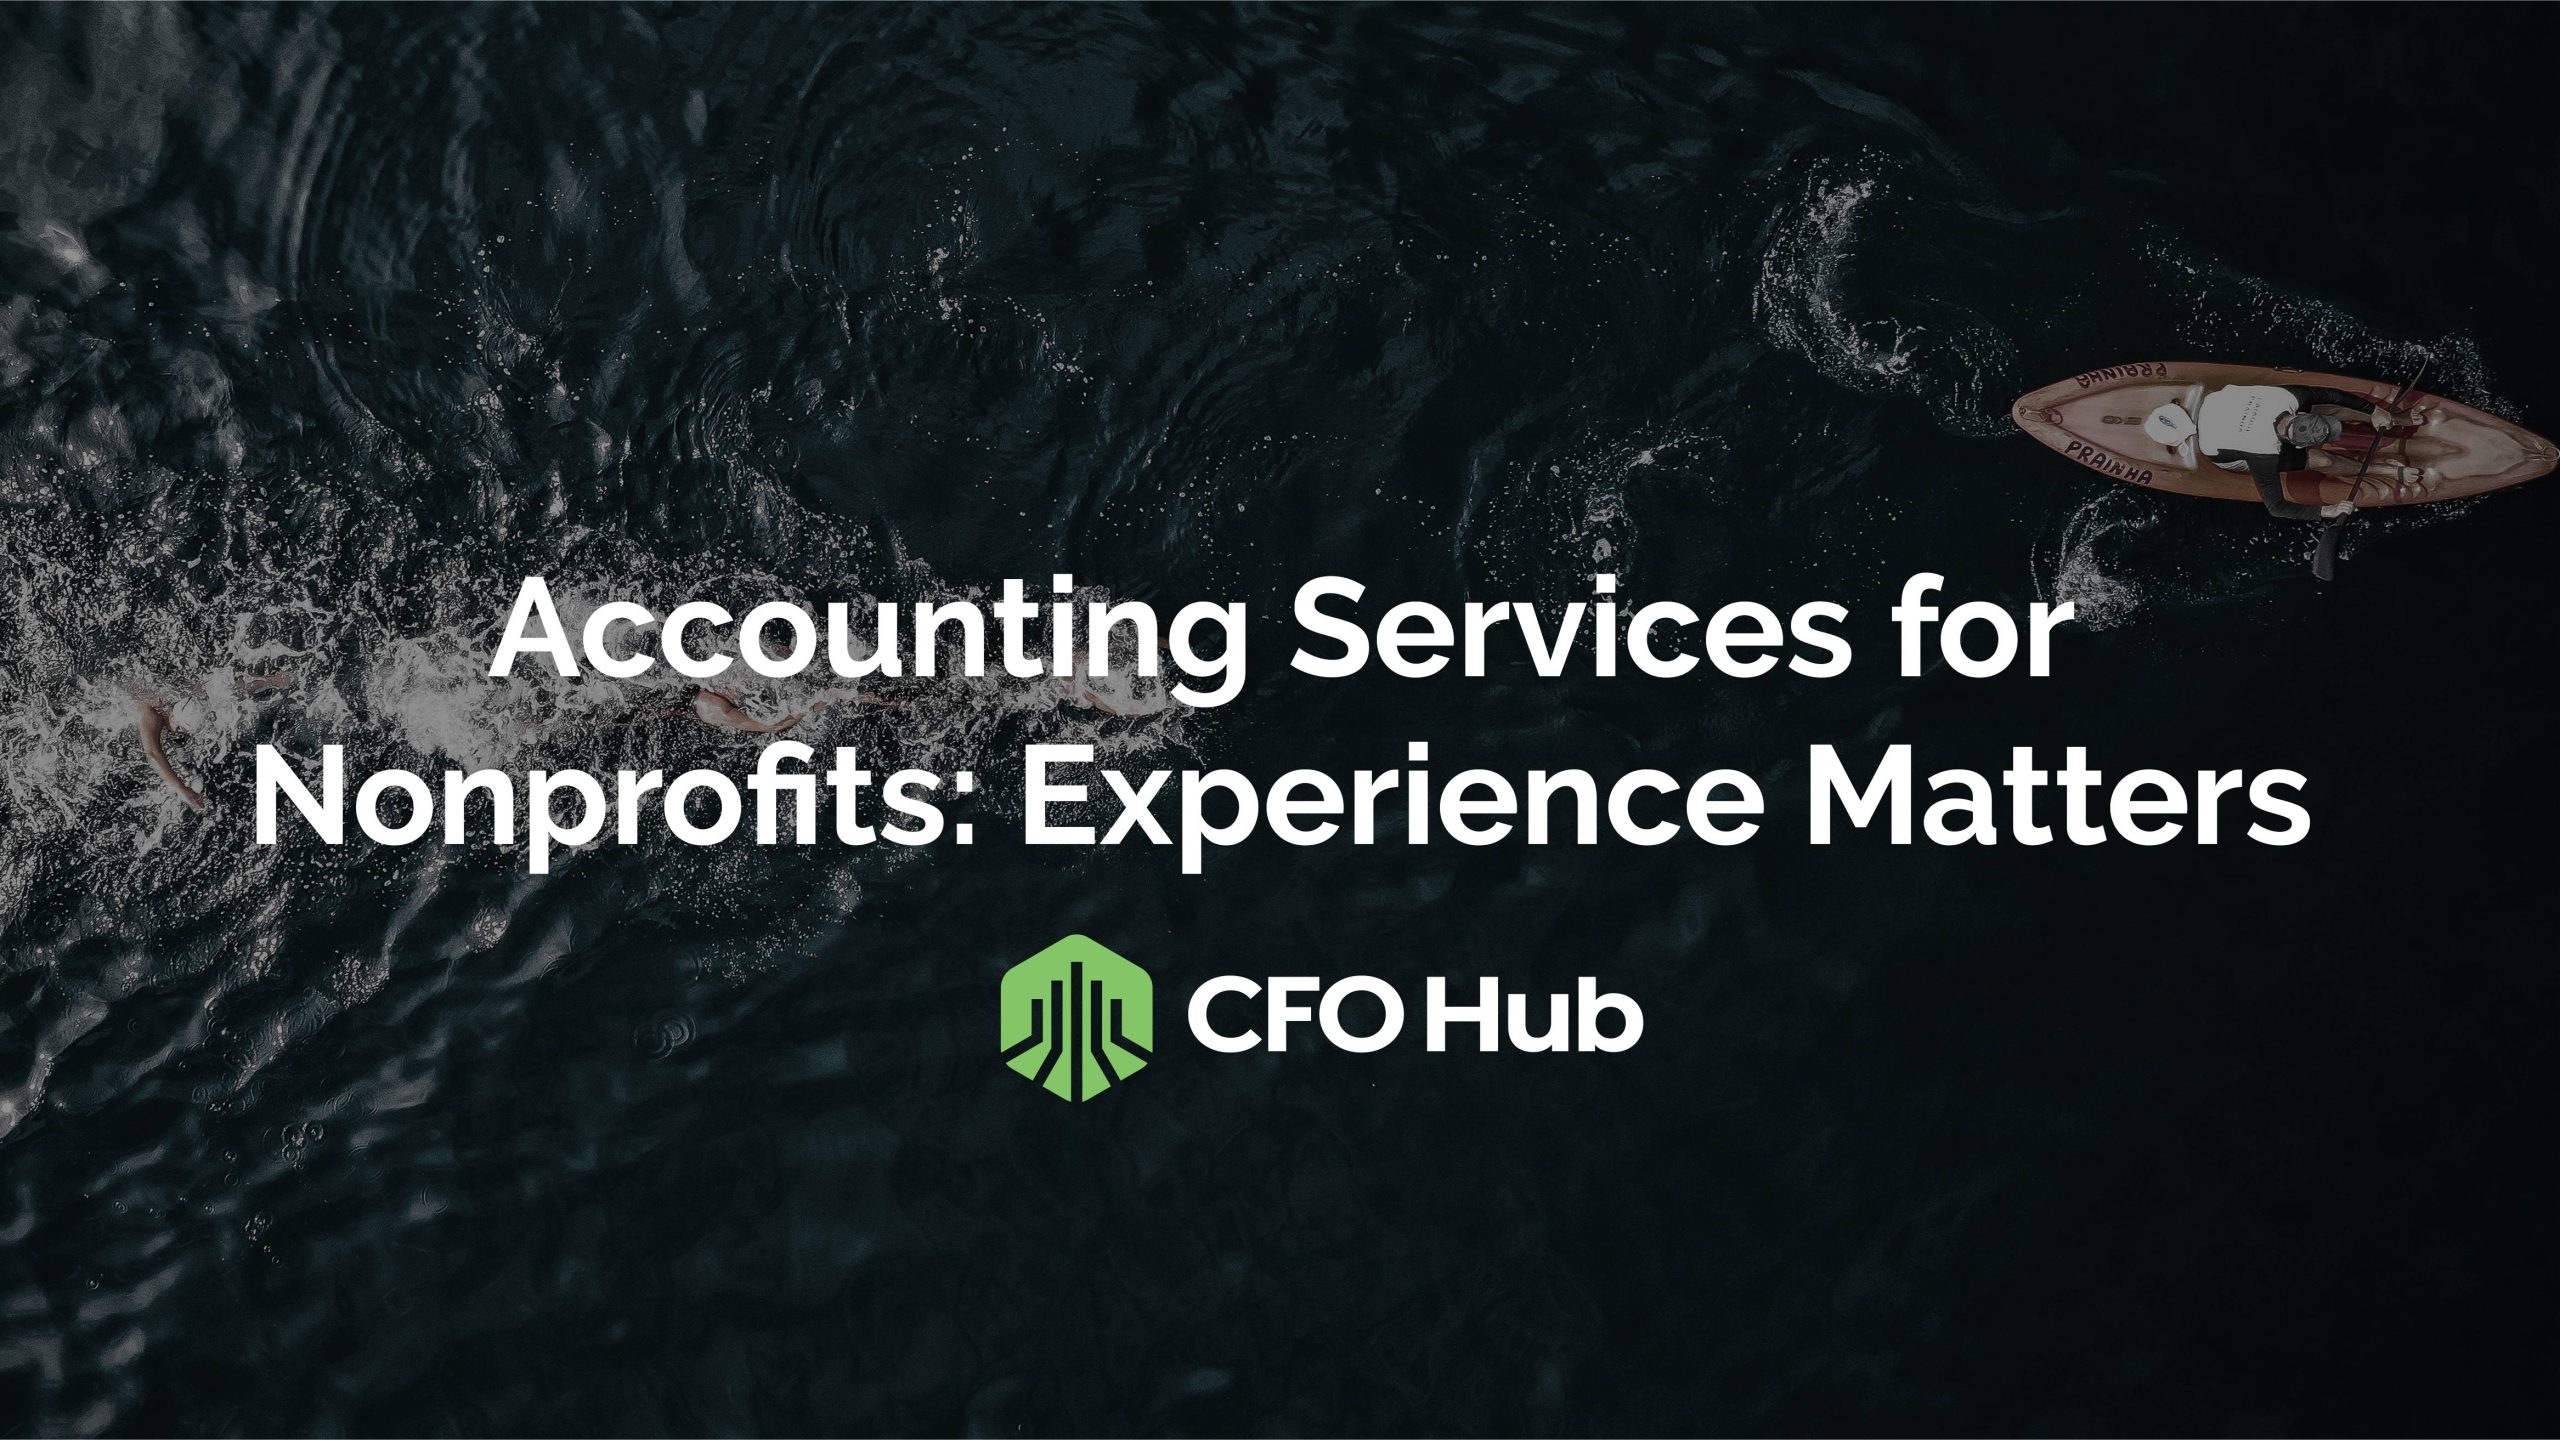 An image with a dark ocean background featuring a person rowing a boat near the right edge. The text overlay reads, "Experience Matters in Accounting Services for Nonprofits," along with the CFO Hub logo below the text.